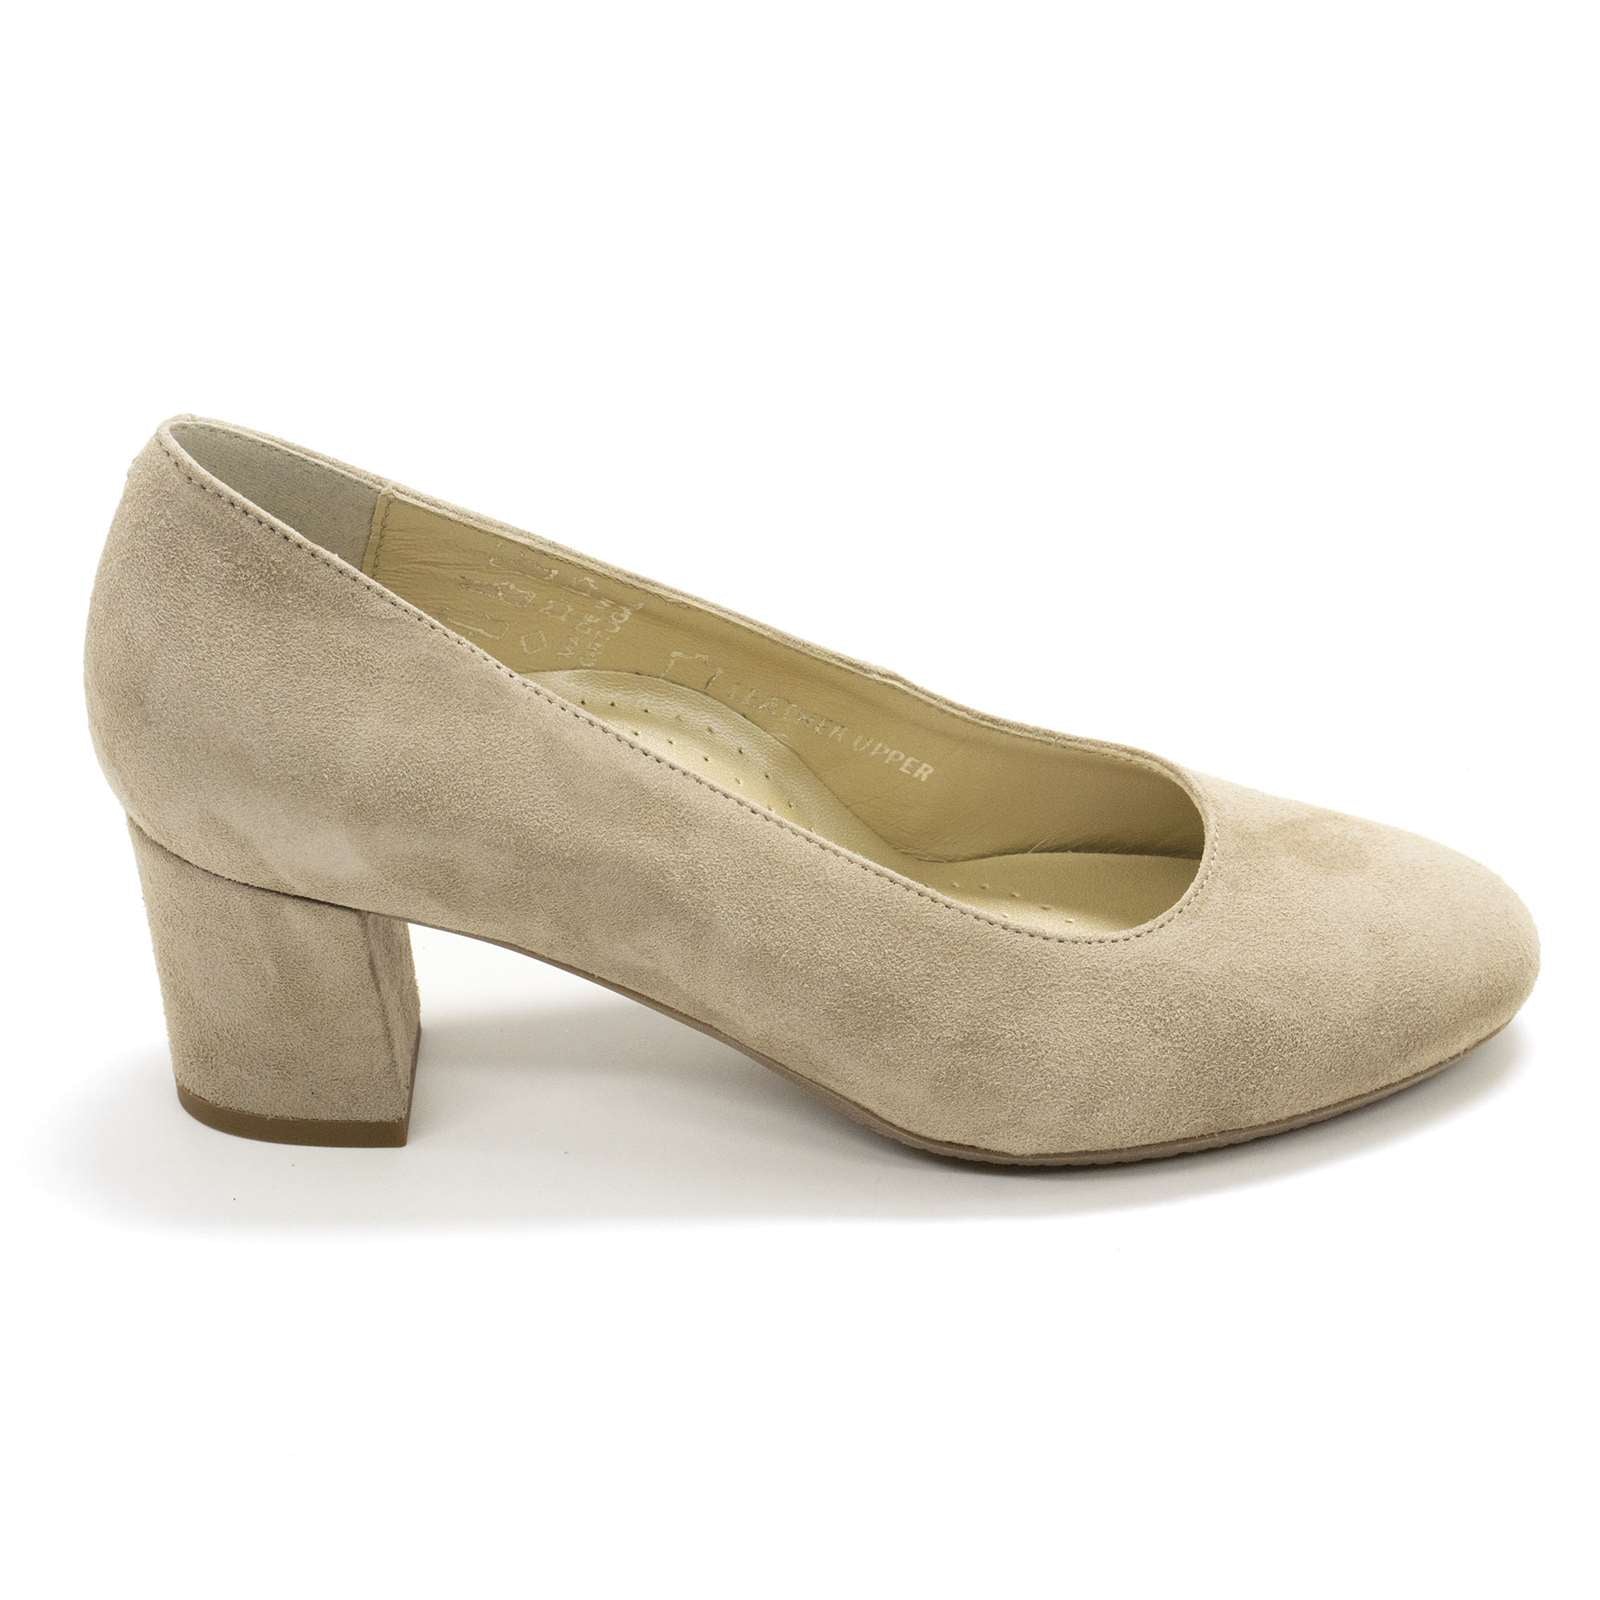 Eric Michael Women Abby Classic Style Suede Heels